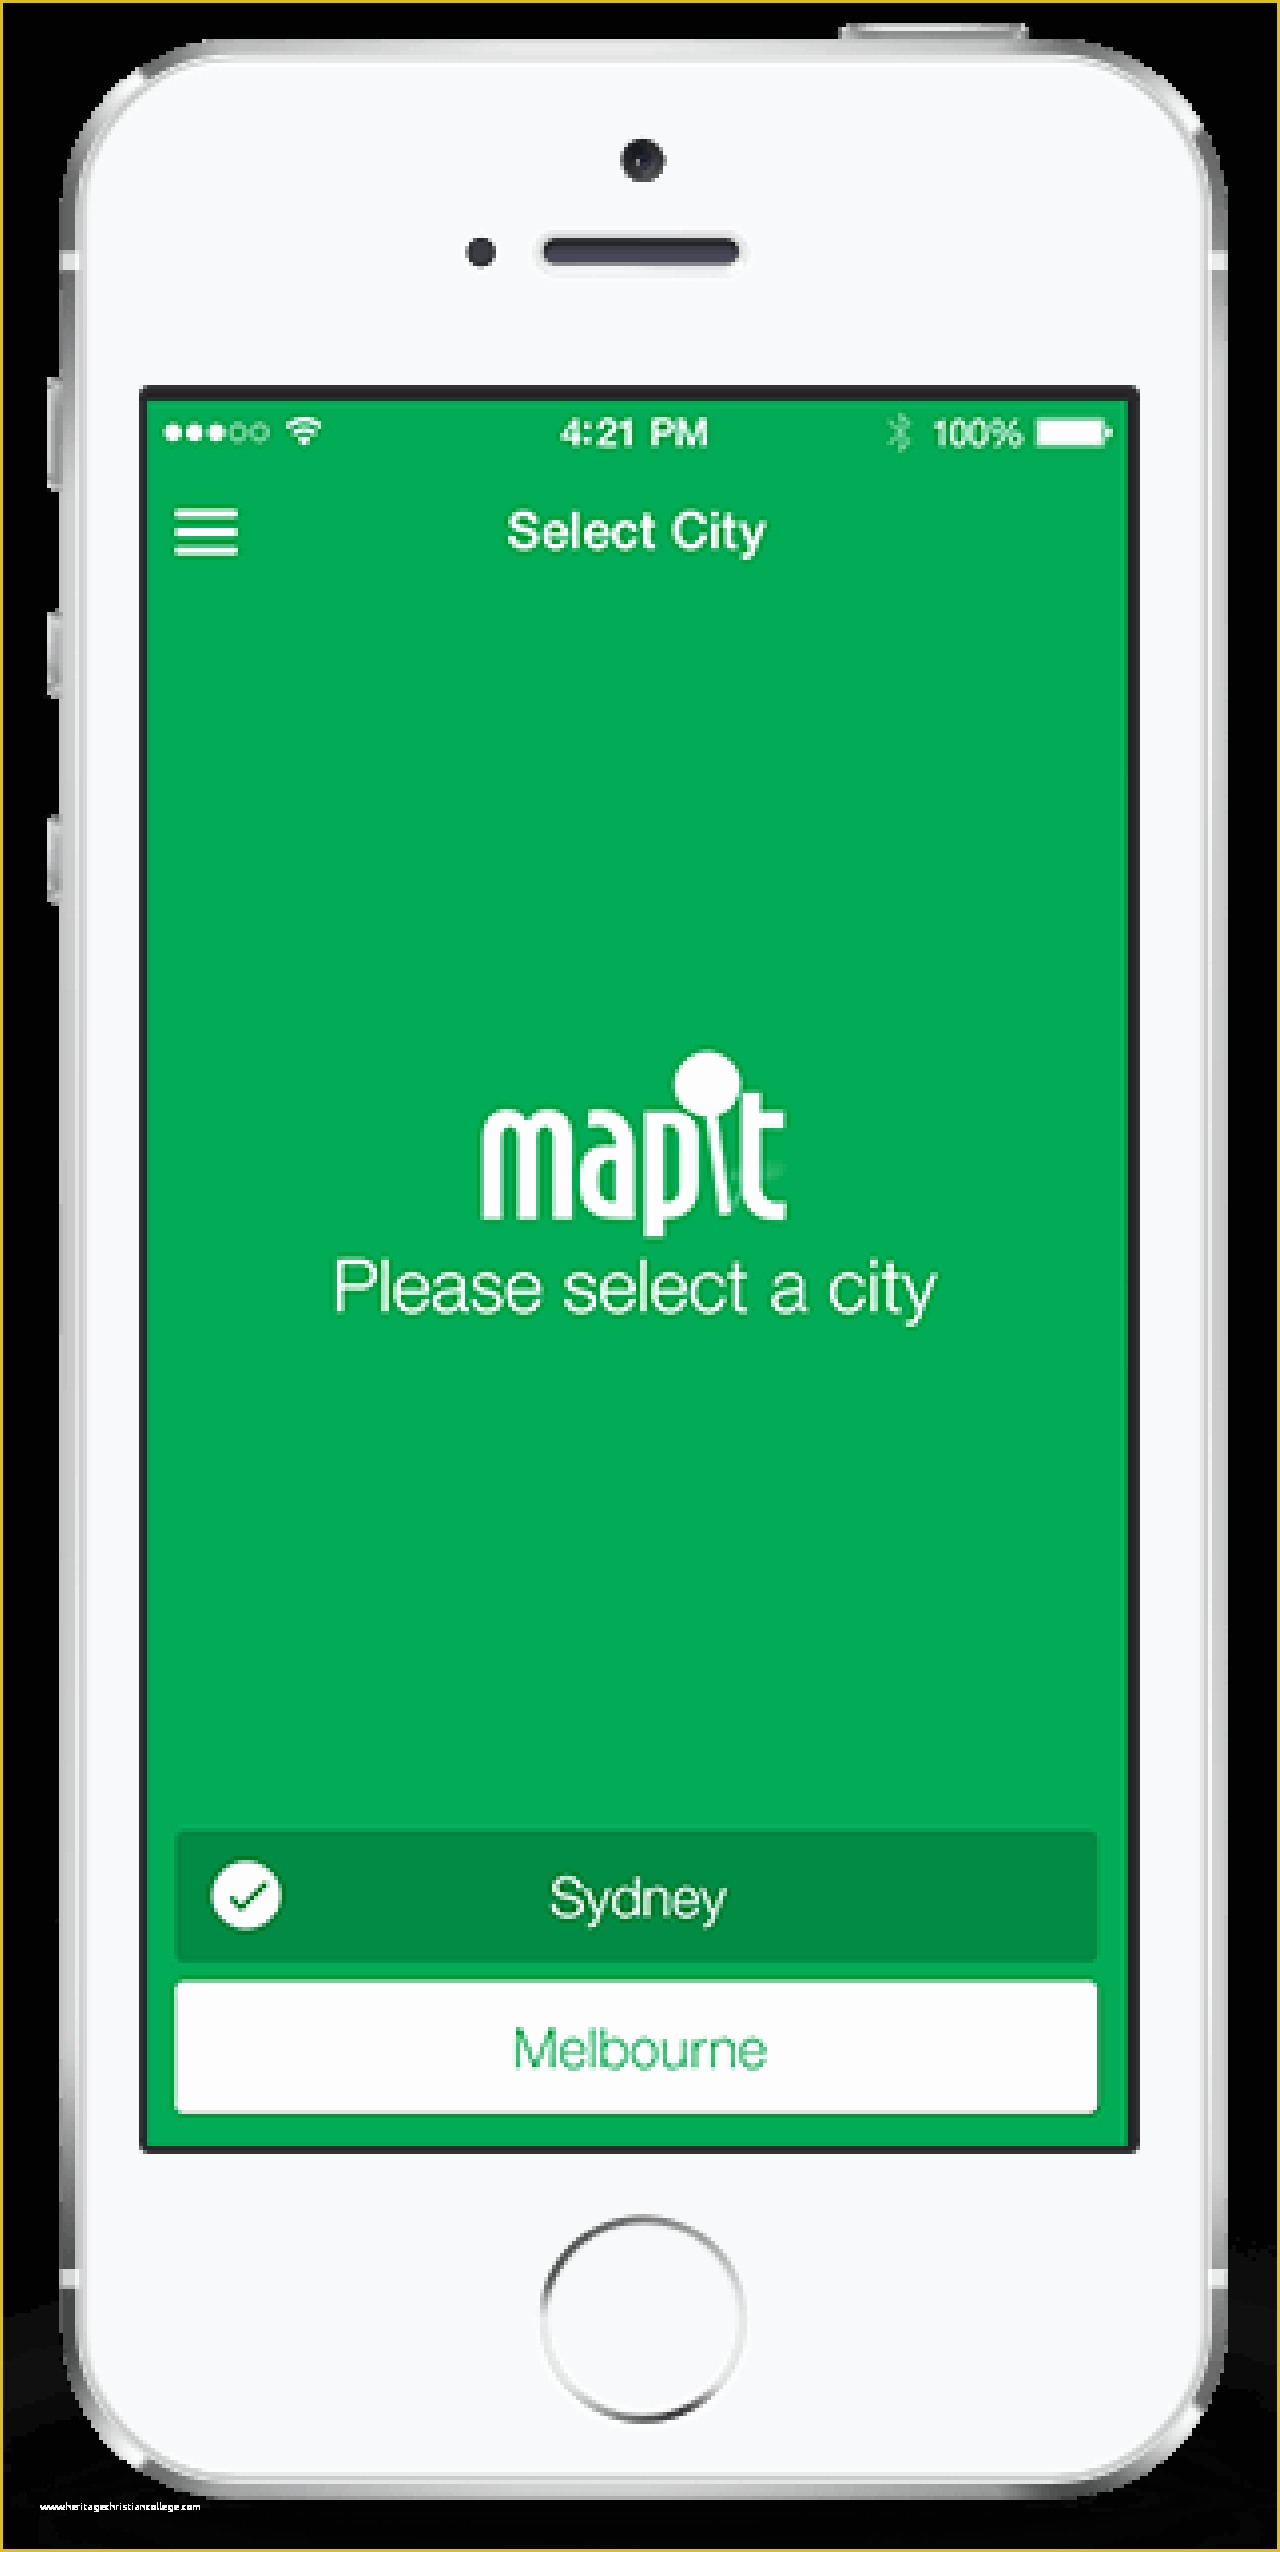 App Templates Free Of Buy Mapit App Template Ios Navigation